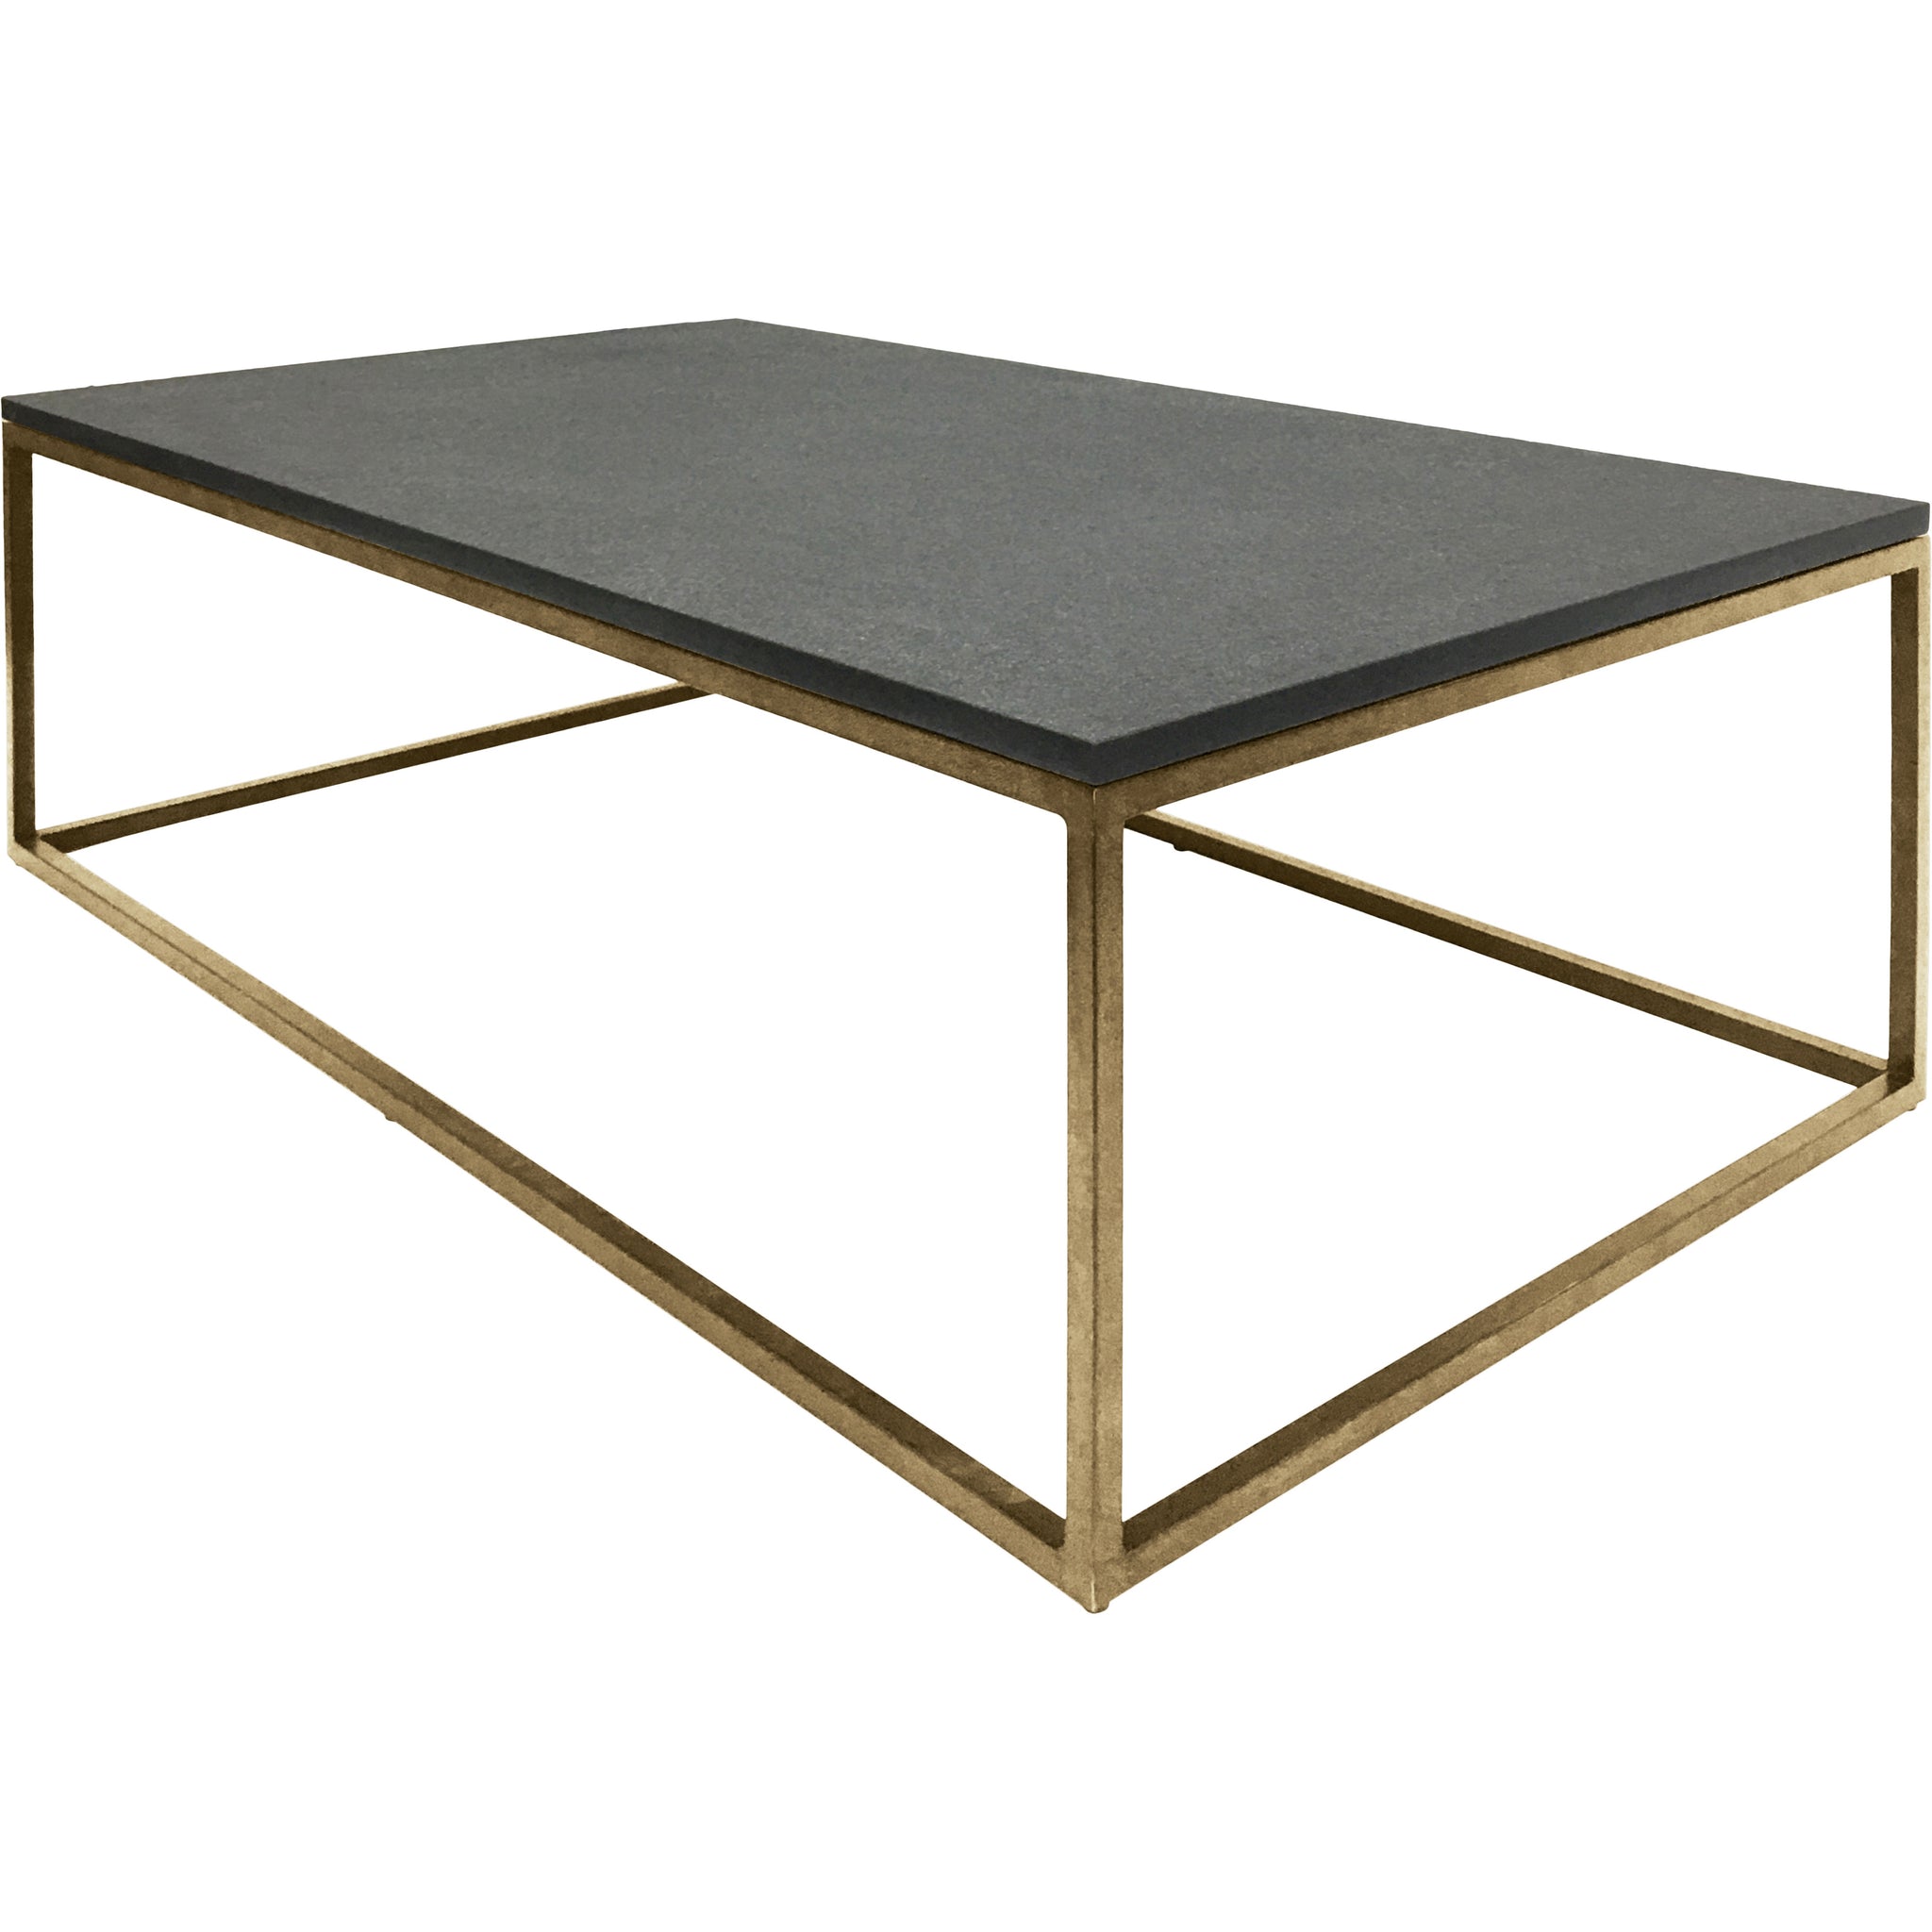 Forge Iron Coffee Table Aged Champagne Finish Galaxy Slate Top Large 140x81